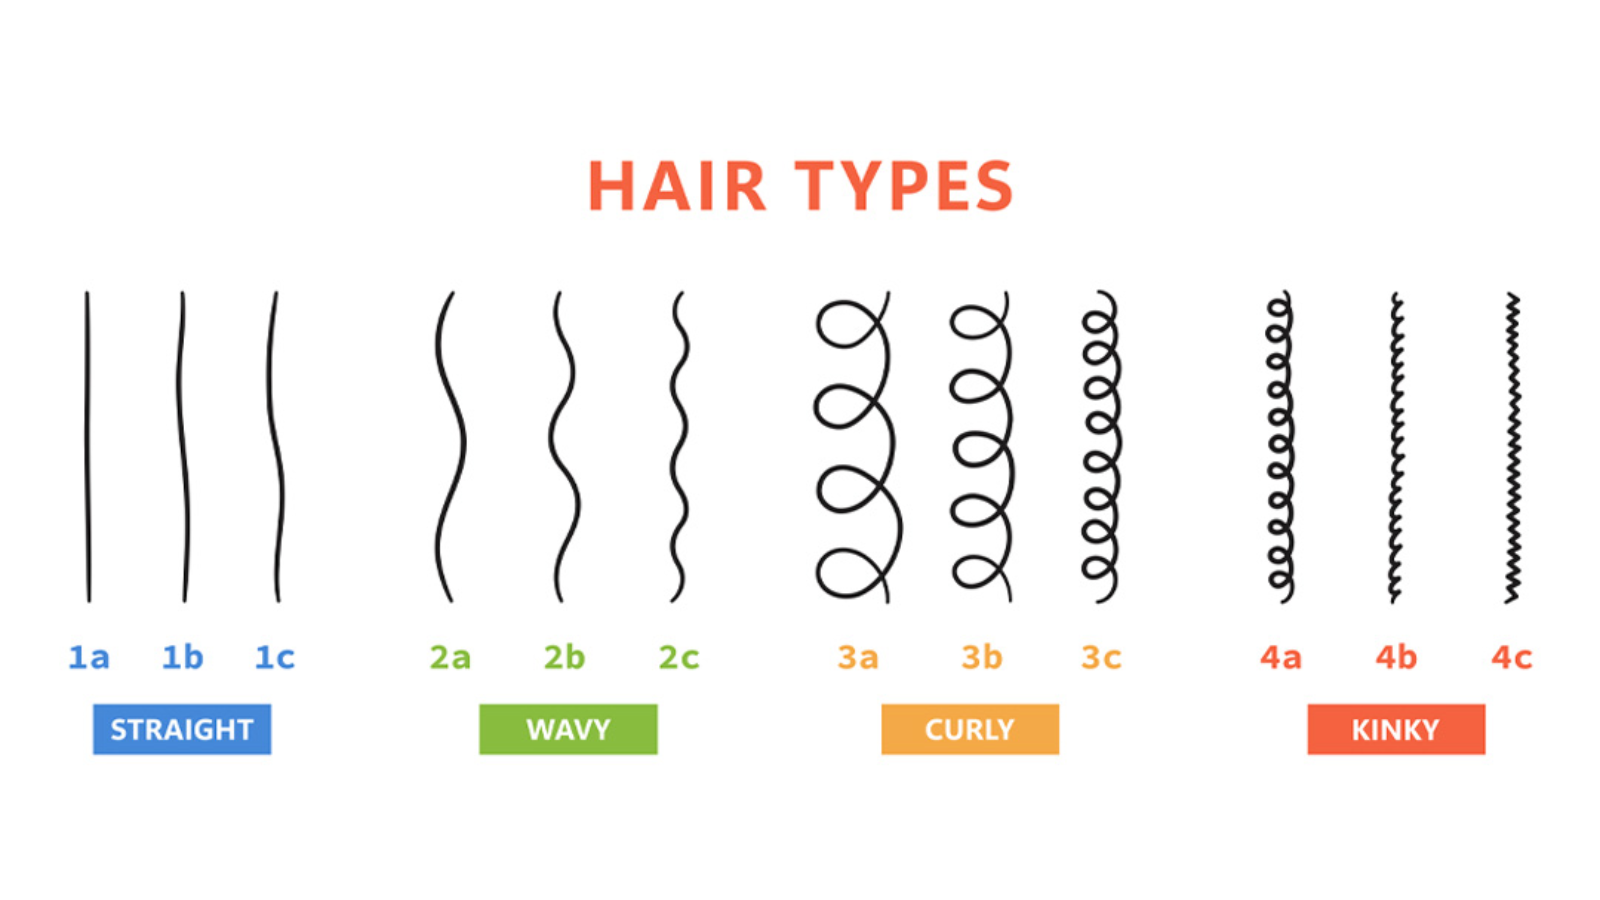 4 main types of hair types: Which one is your hair type?